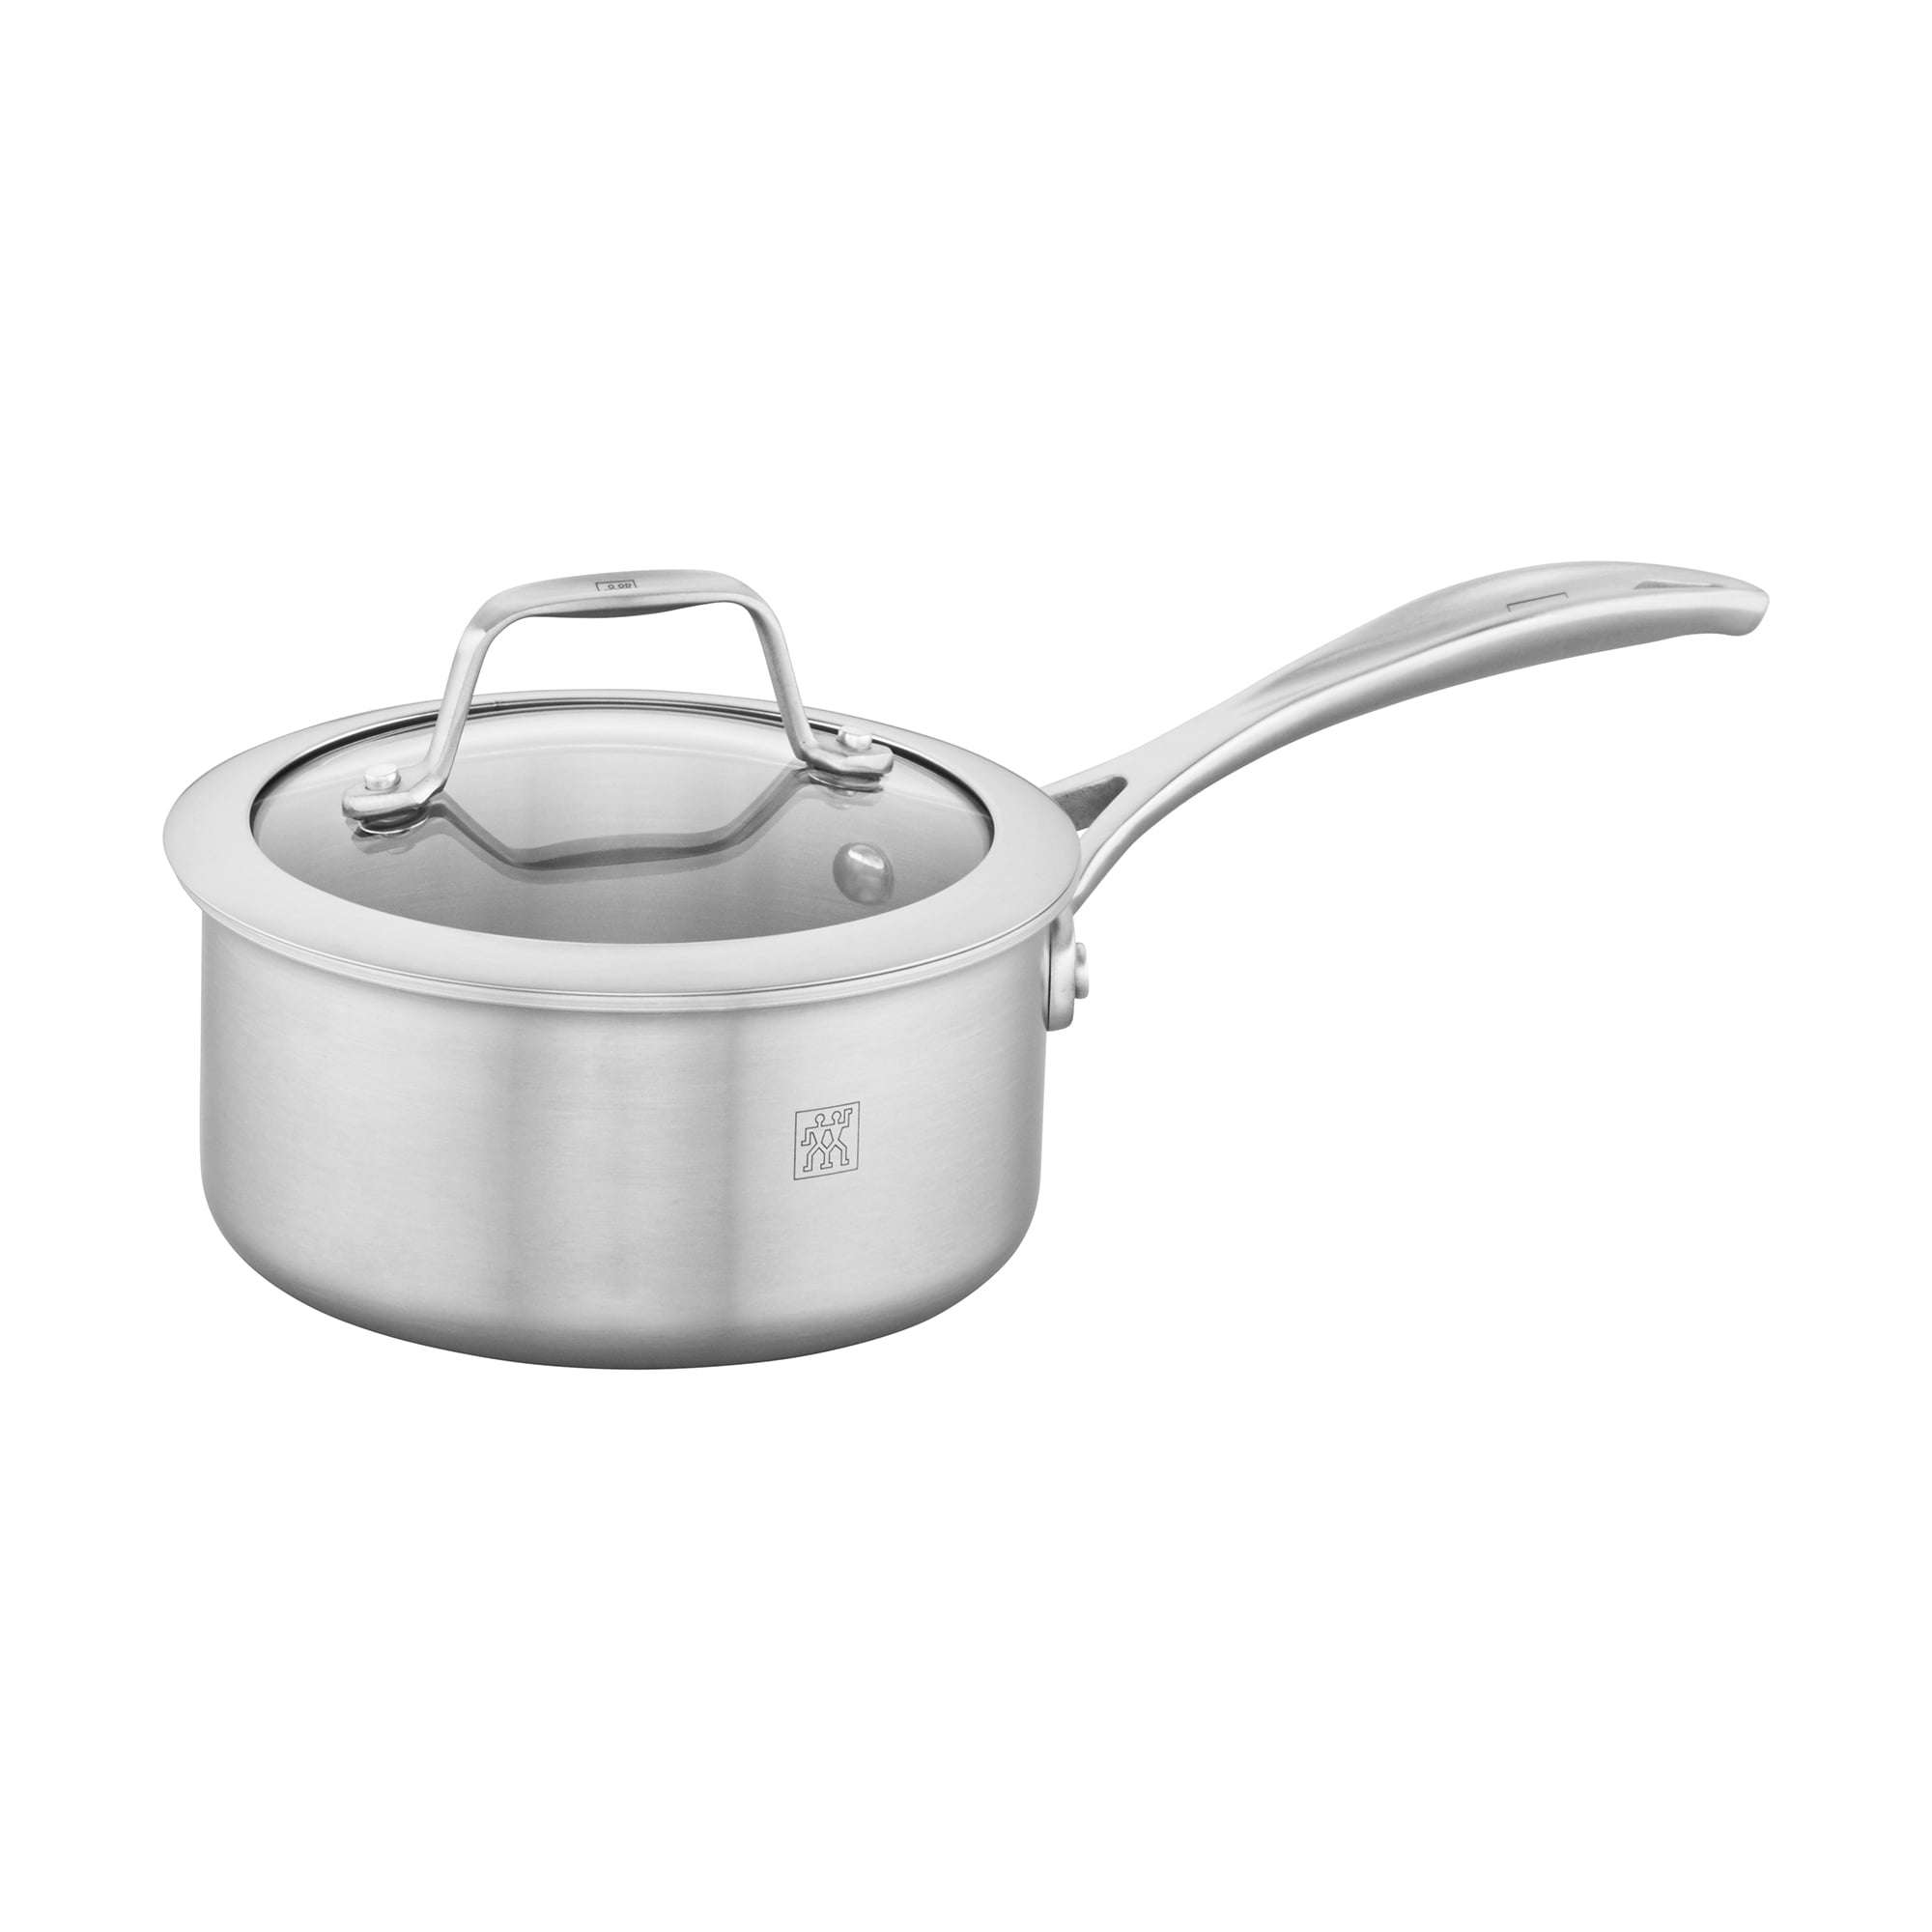 SLOTTET Tri-Ply Whole-Clad Stainless Steel Sauce Pan with Steamer ,1.5  Quart Small Multipurpose Pot with Pour Spout,Strainer Glass Lid, 1Quart